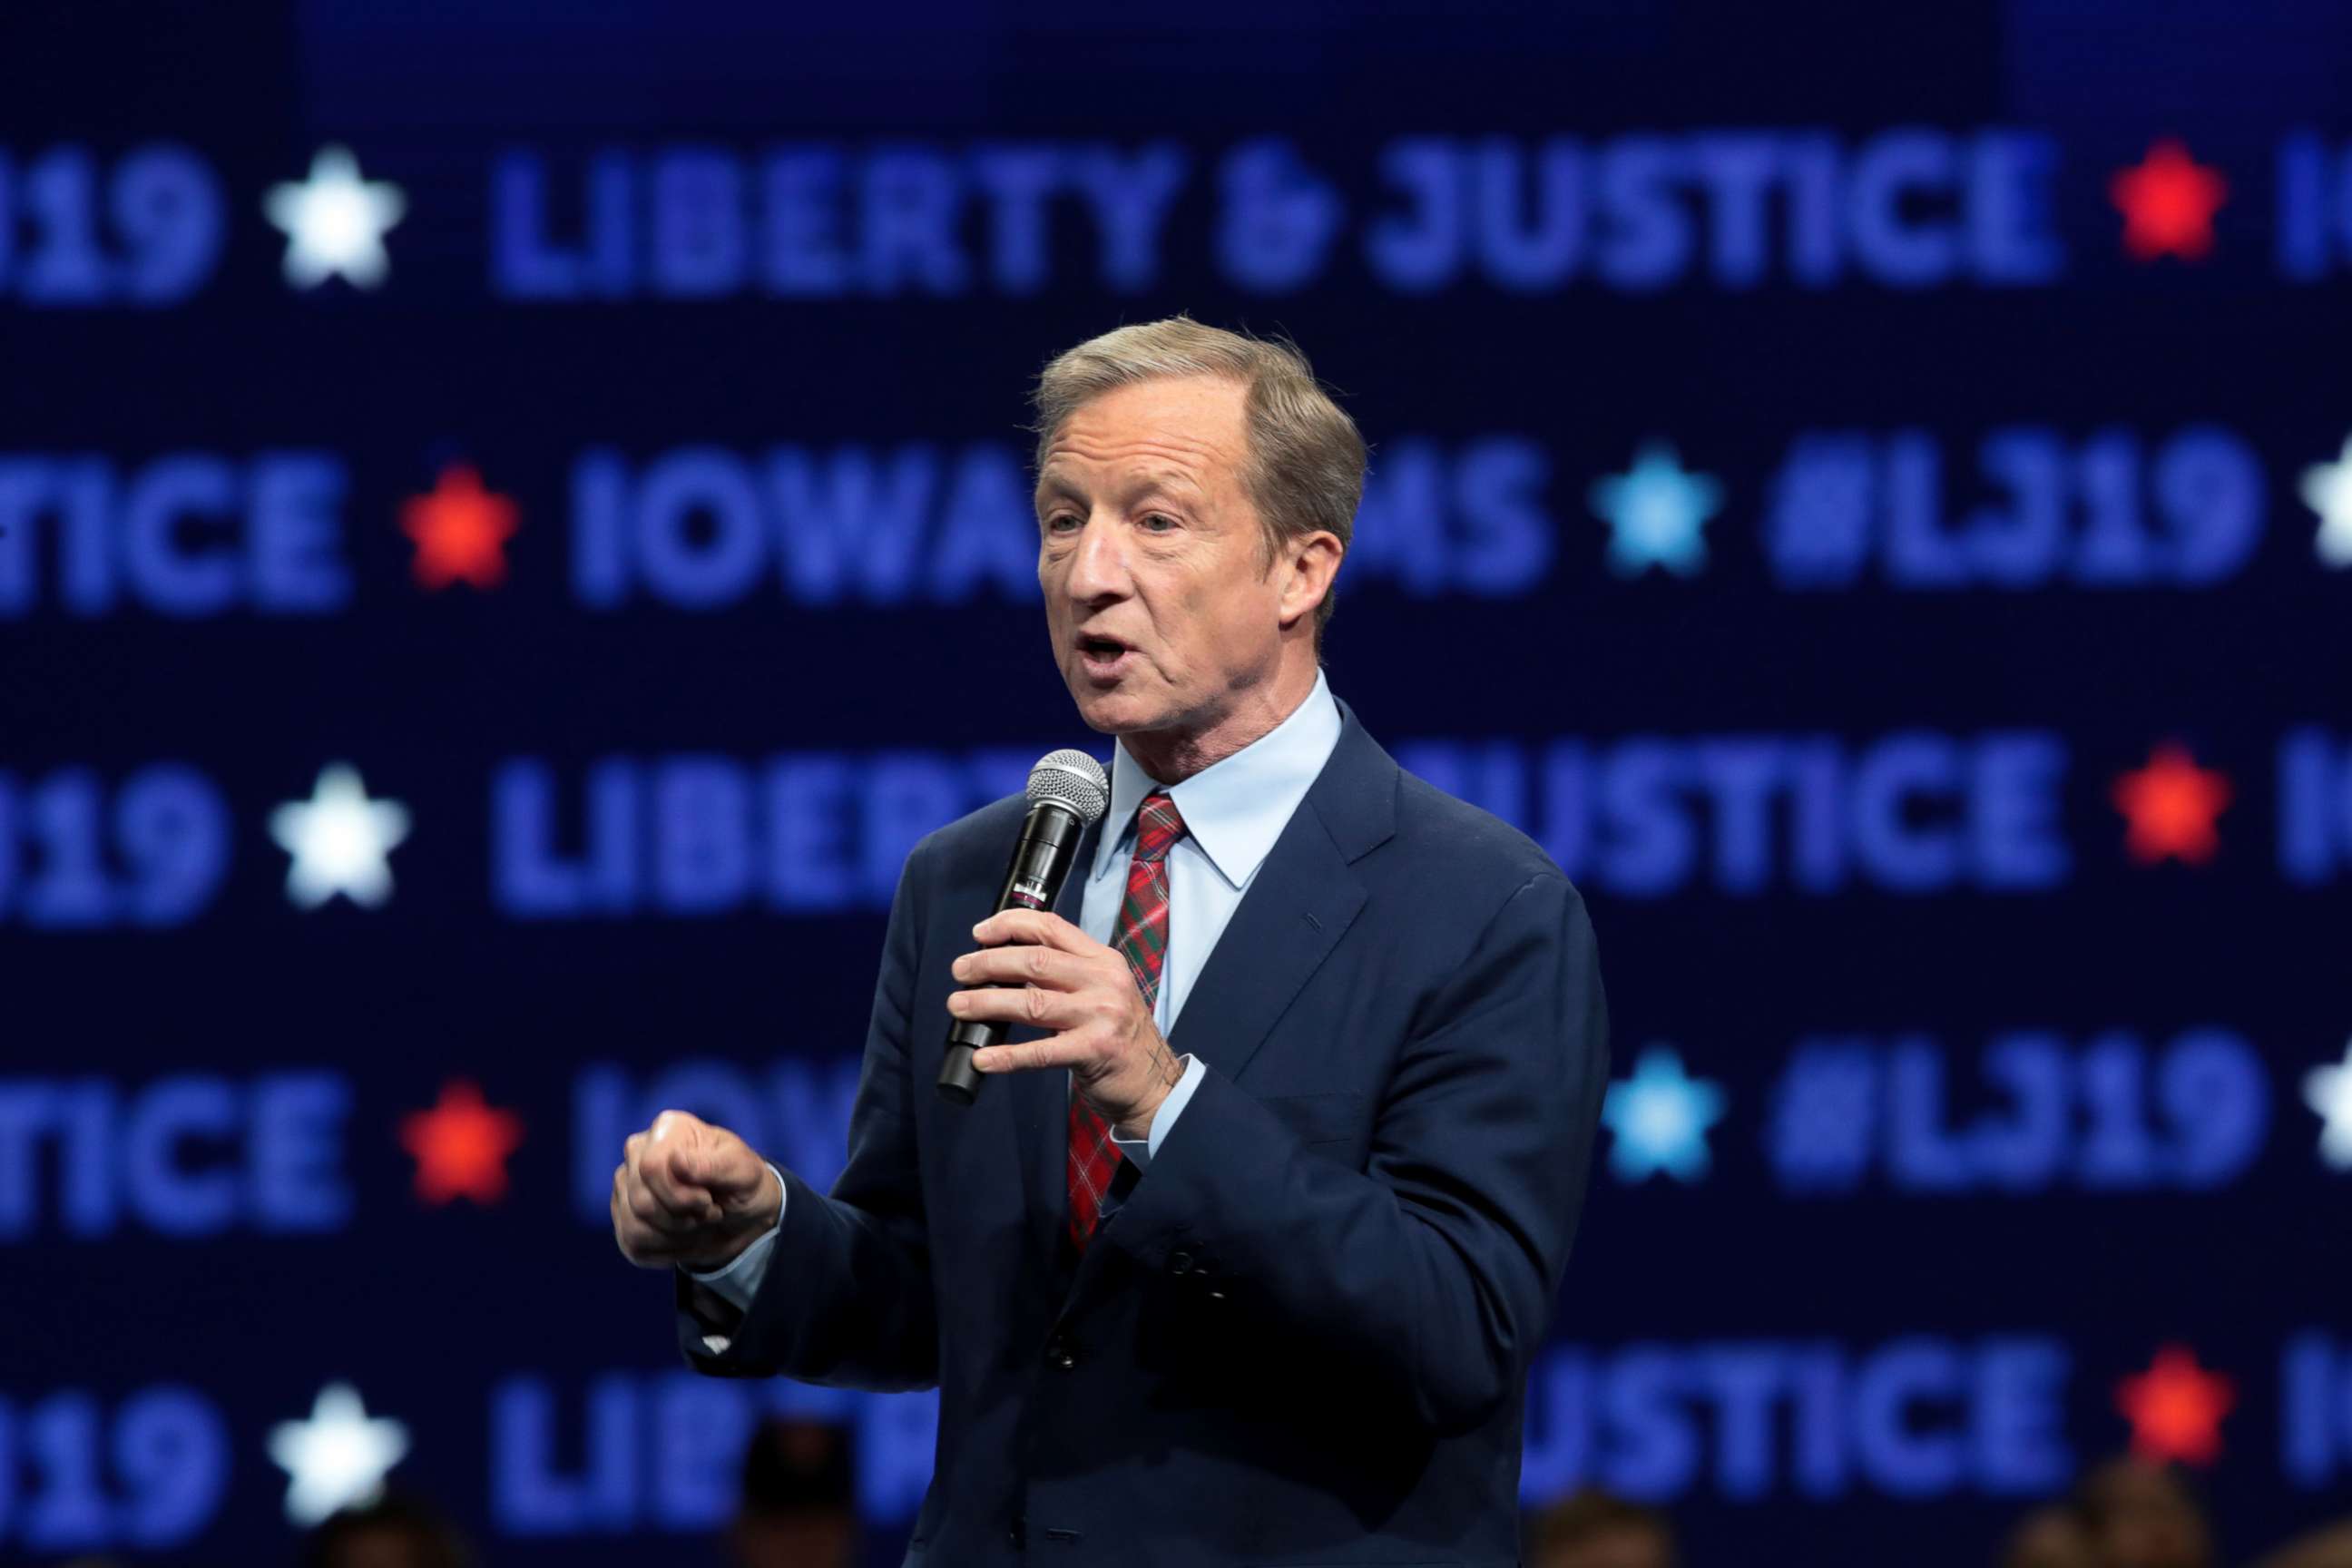 PHOTO: Democratic presidential candidate, philanthropist Tom Steyer speaks at the Liberty and Justice Celebration at the Wells Fargo Arena, Nov. 1, 2019, in Des Moines, Iowa.